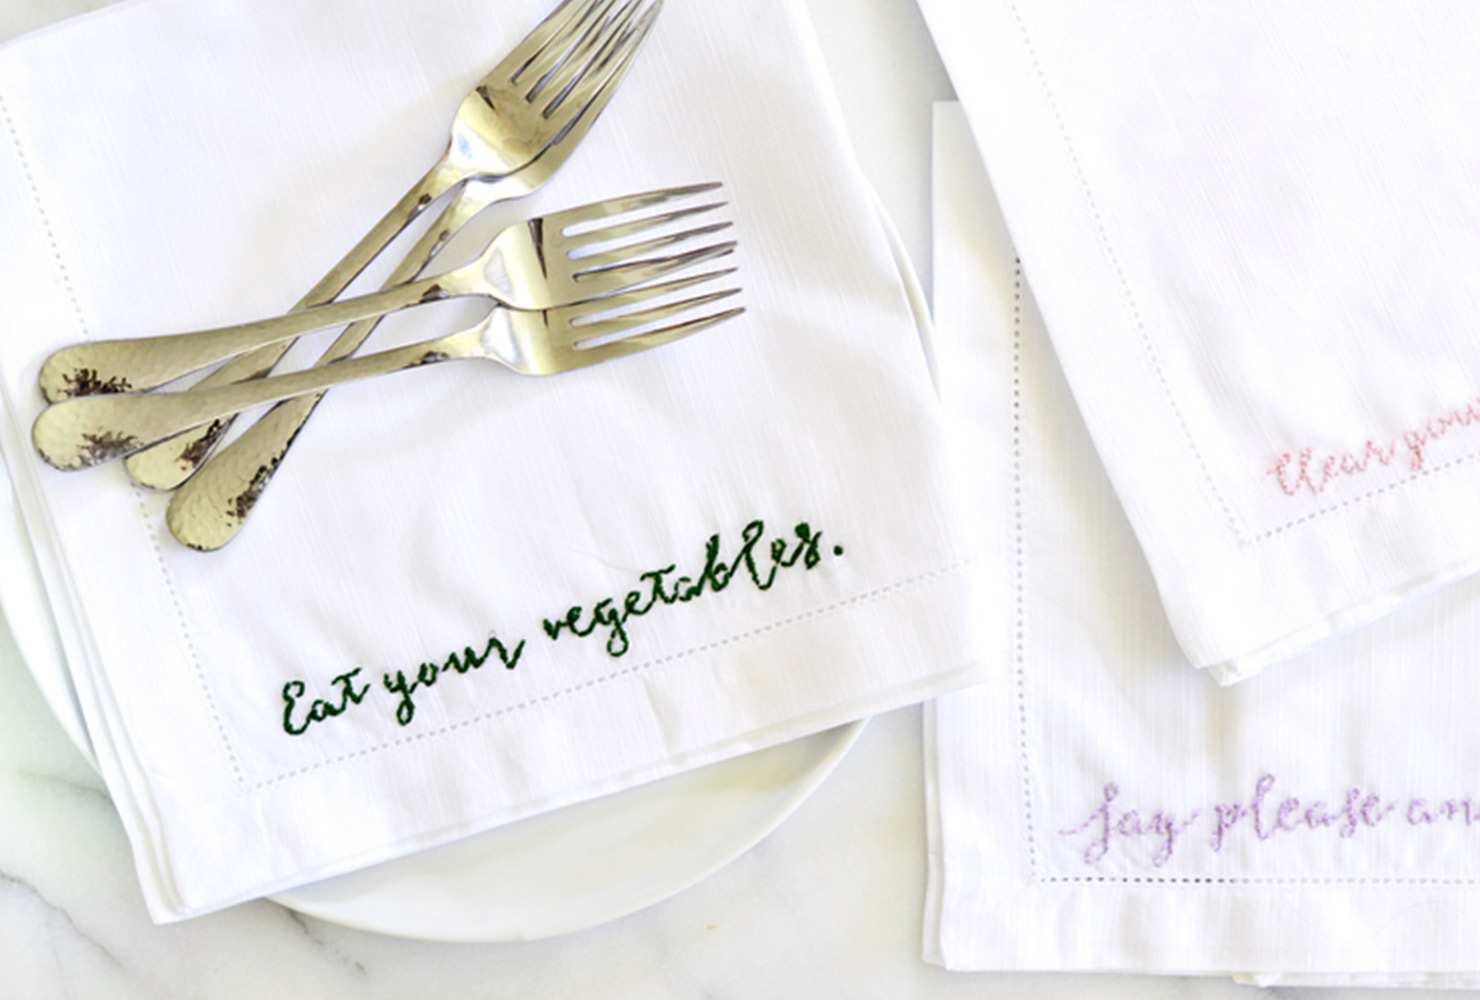 napkins embroidered with slogans